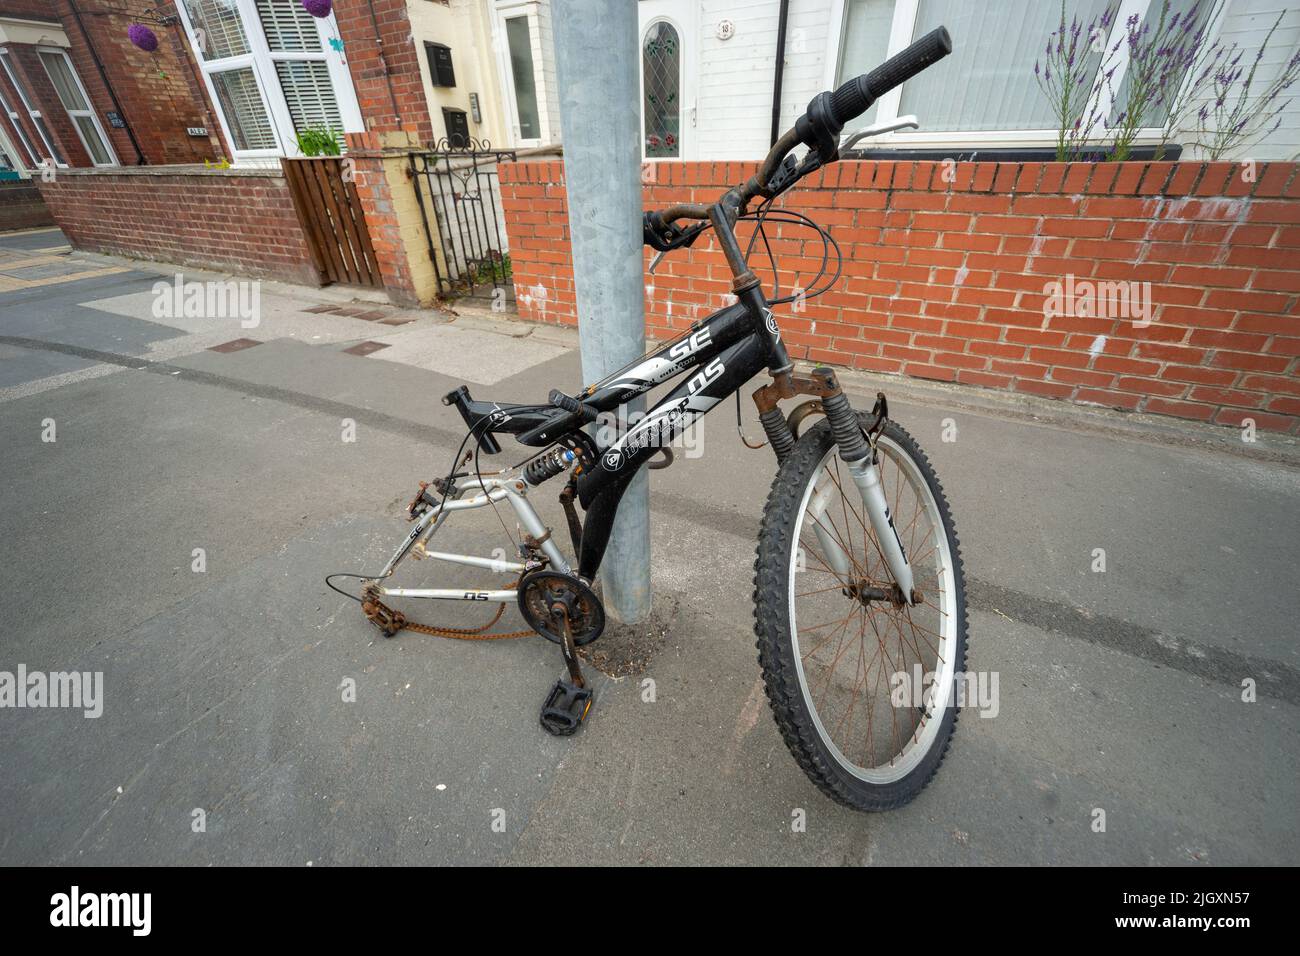 Bicycle with its rear wheel missing, England, UK Stock Photo